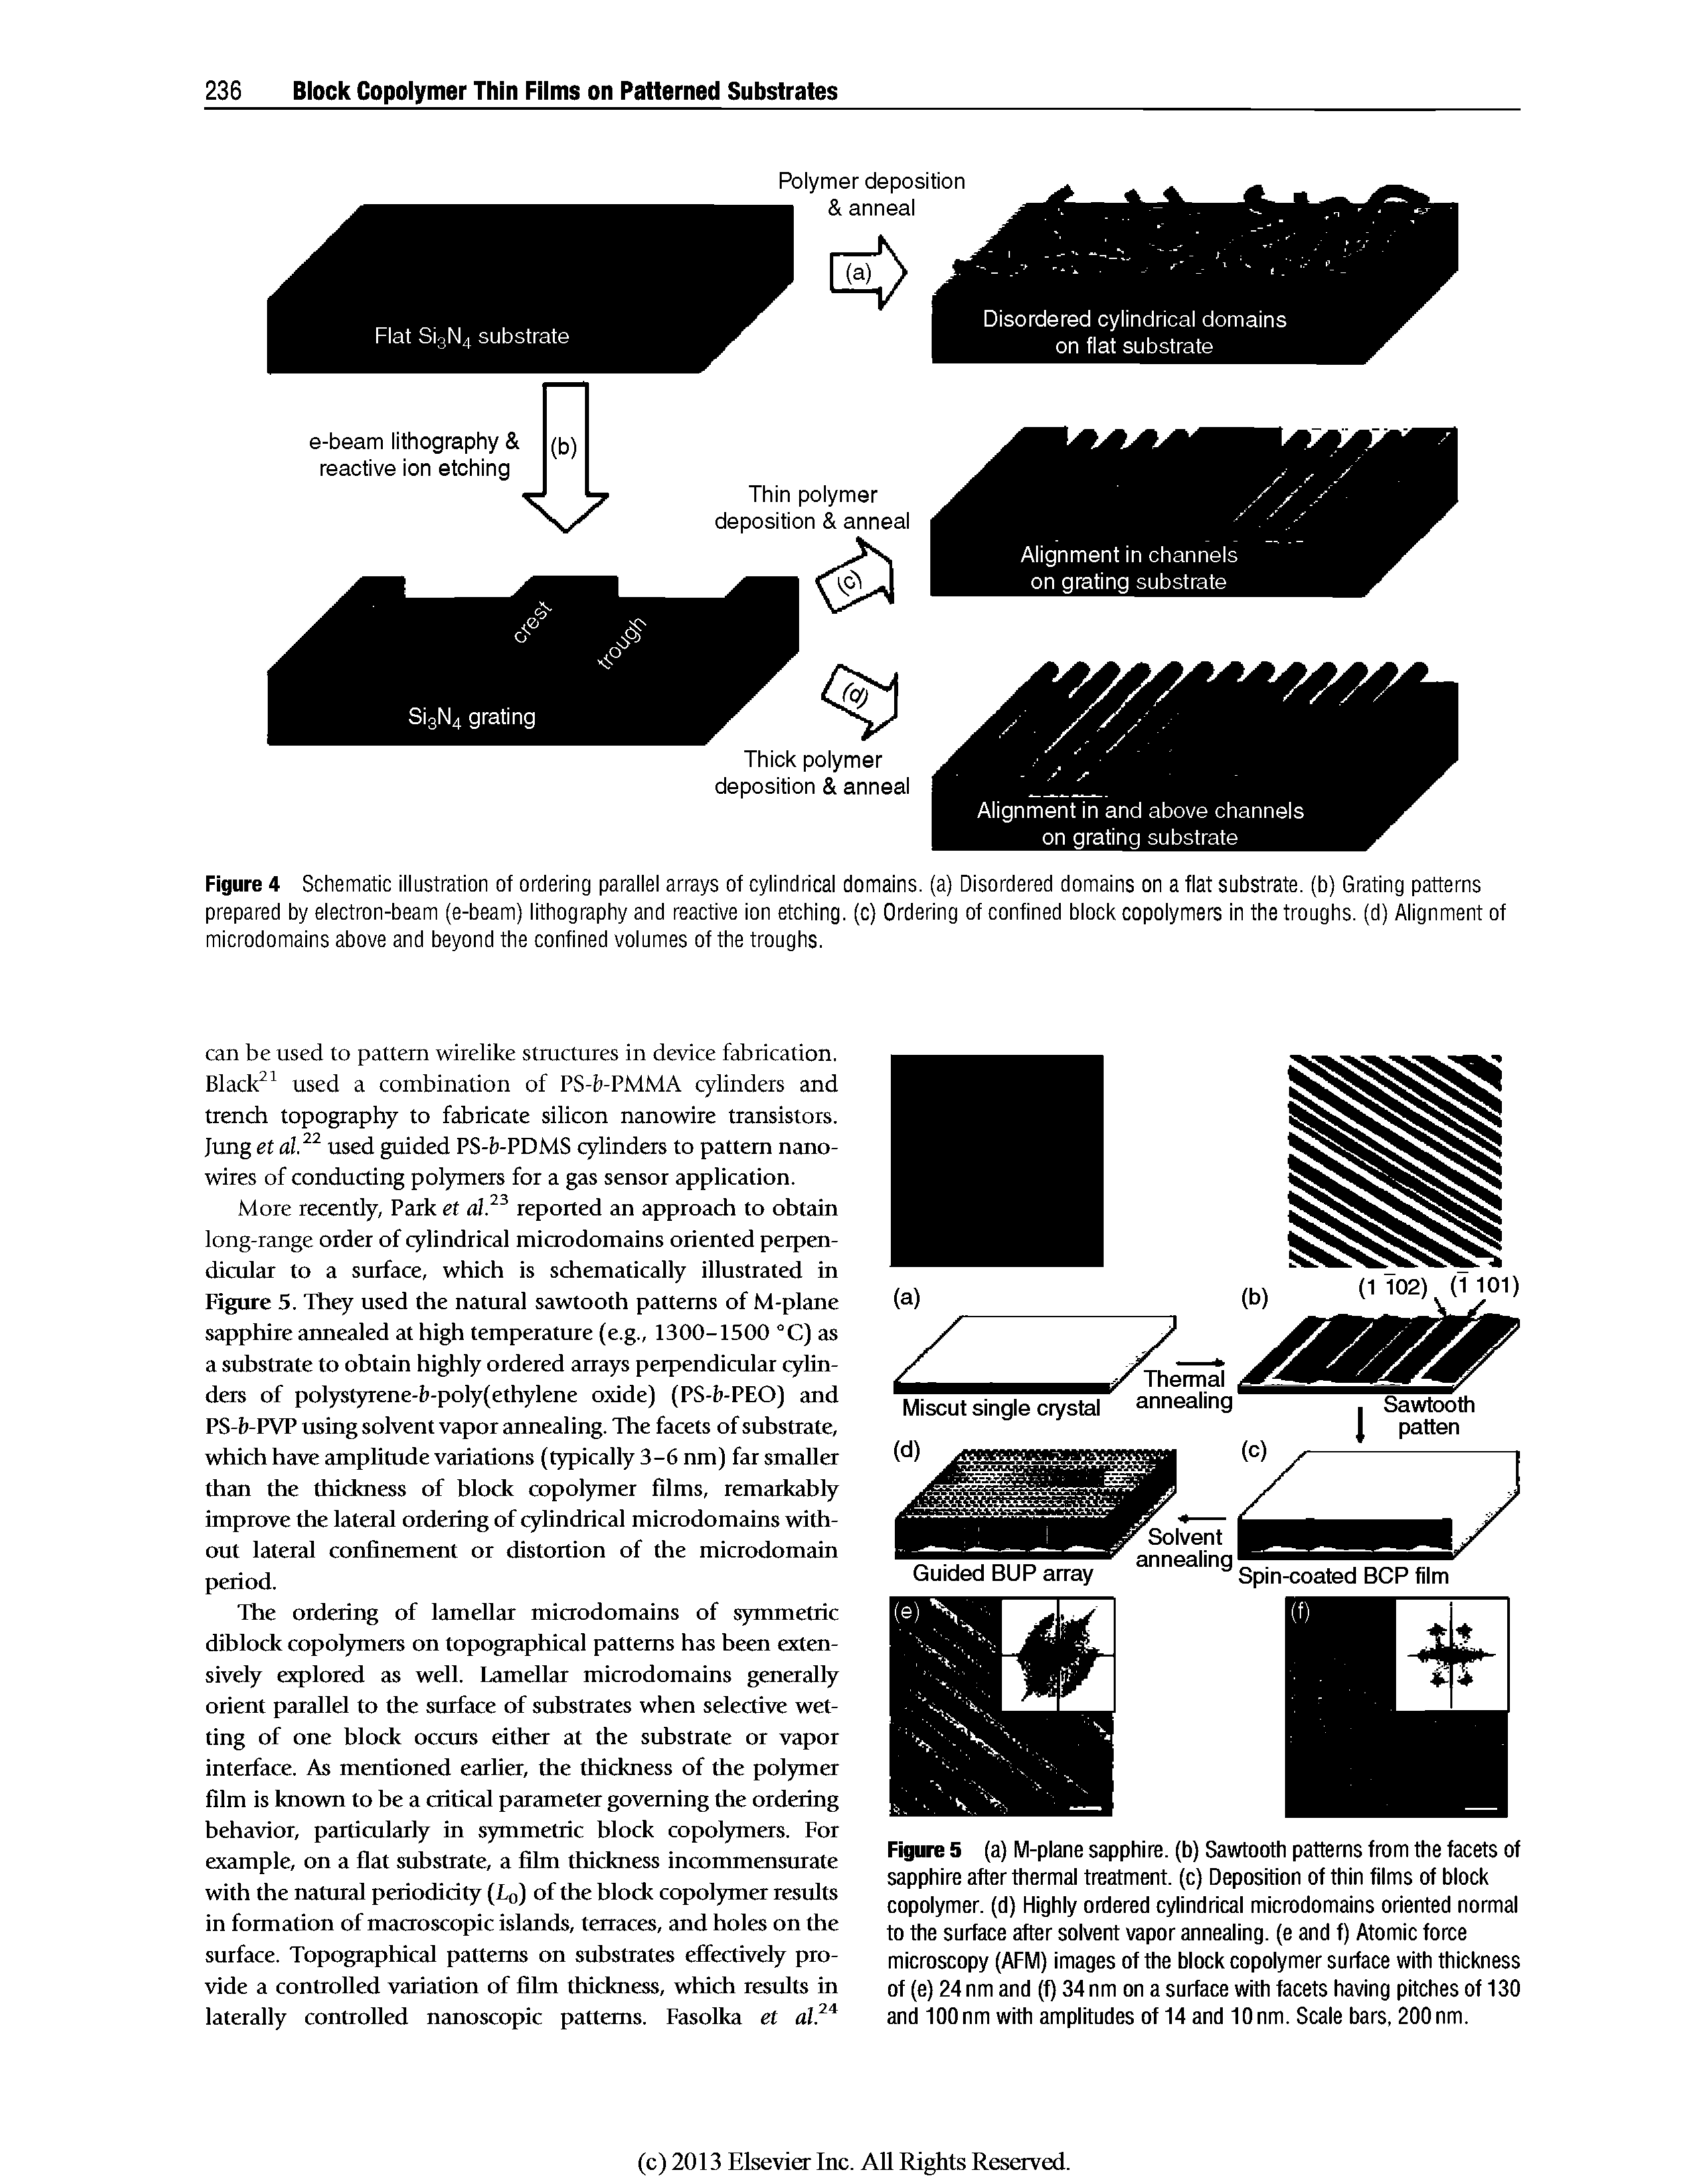 Figure 4 Schematic illustration of ordering parallel arrays of cylindrical domains, (a) Disordered domains on a flat substrate, (b) Grating patterns prepared by electron-beam (e-beam) lithography and reactive ion etching, (c) Ordering of confined block copolymers in the troughs, (d) Alignment of microdomains above and beyond the confined volumes of the troughs.